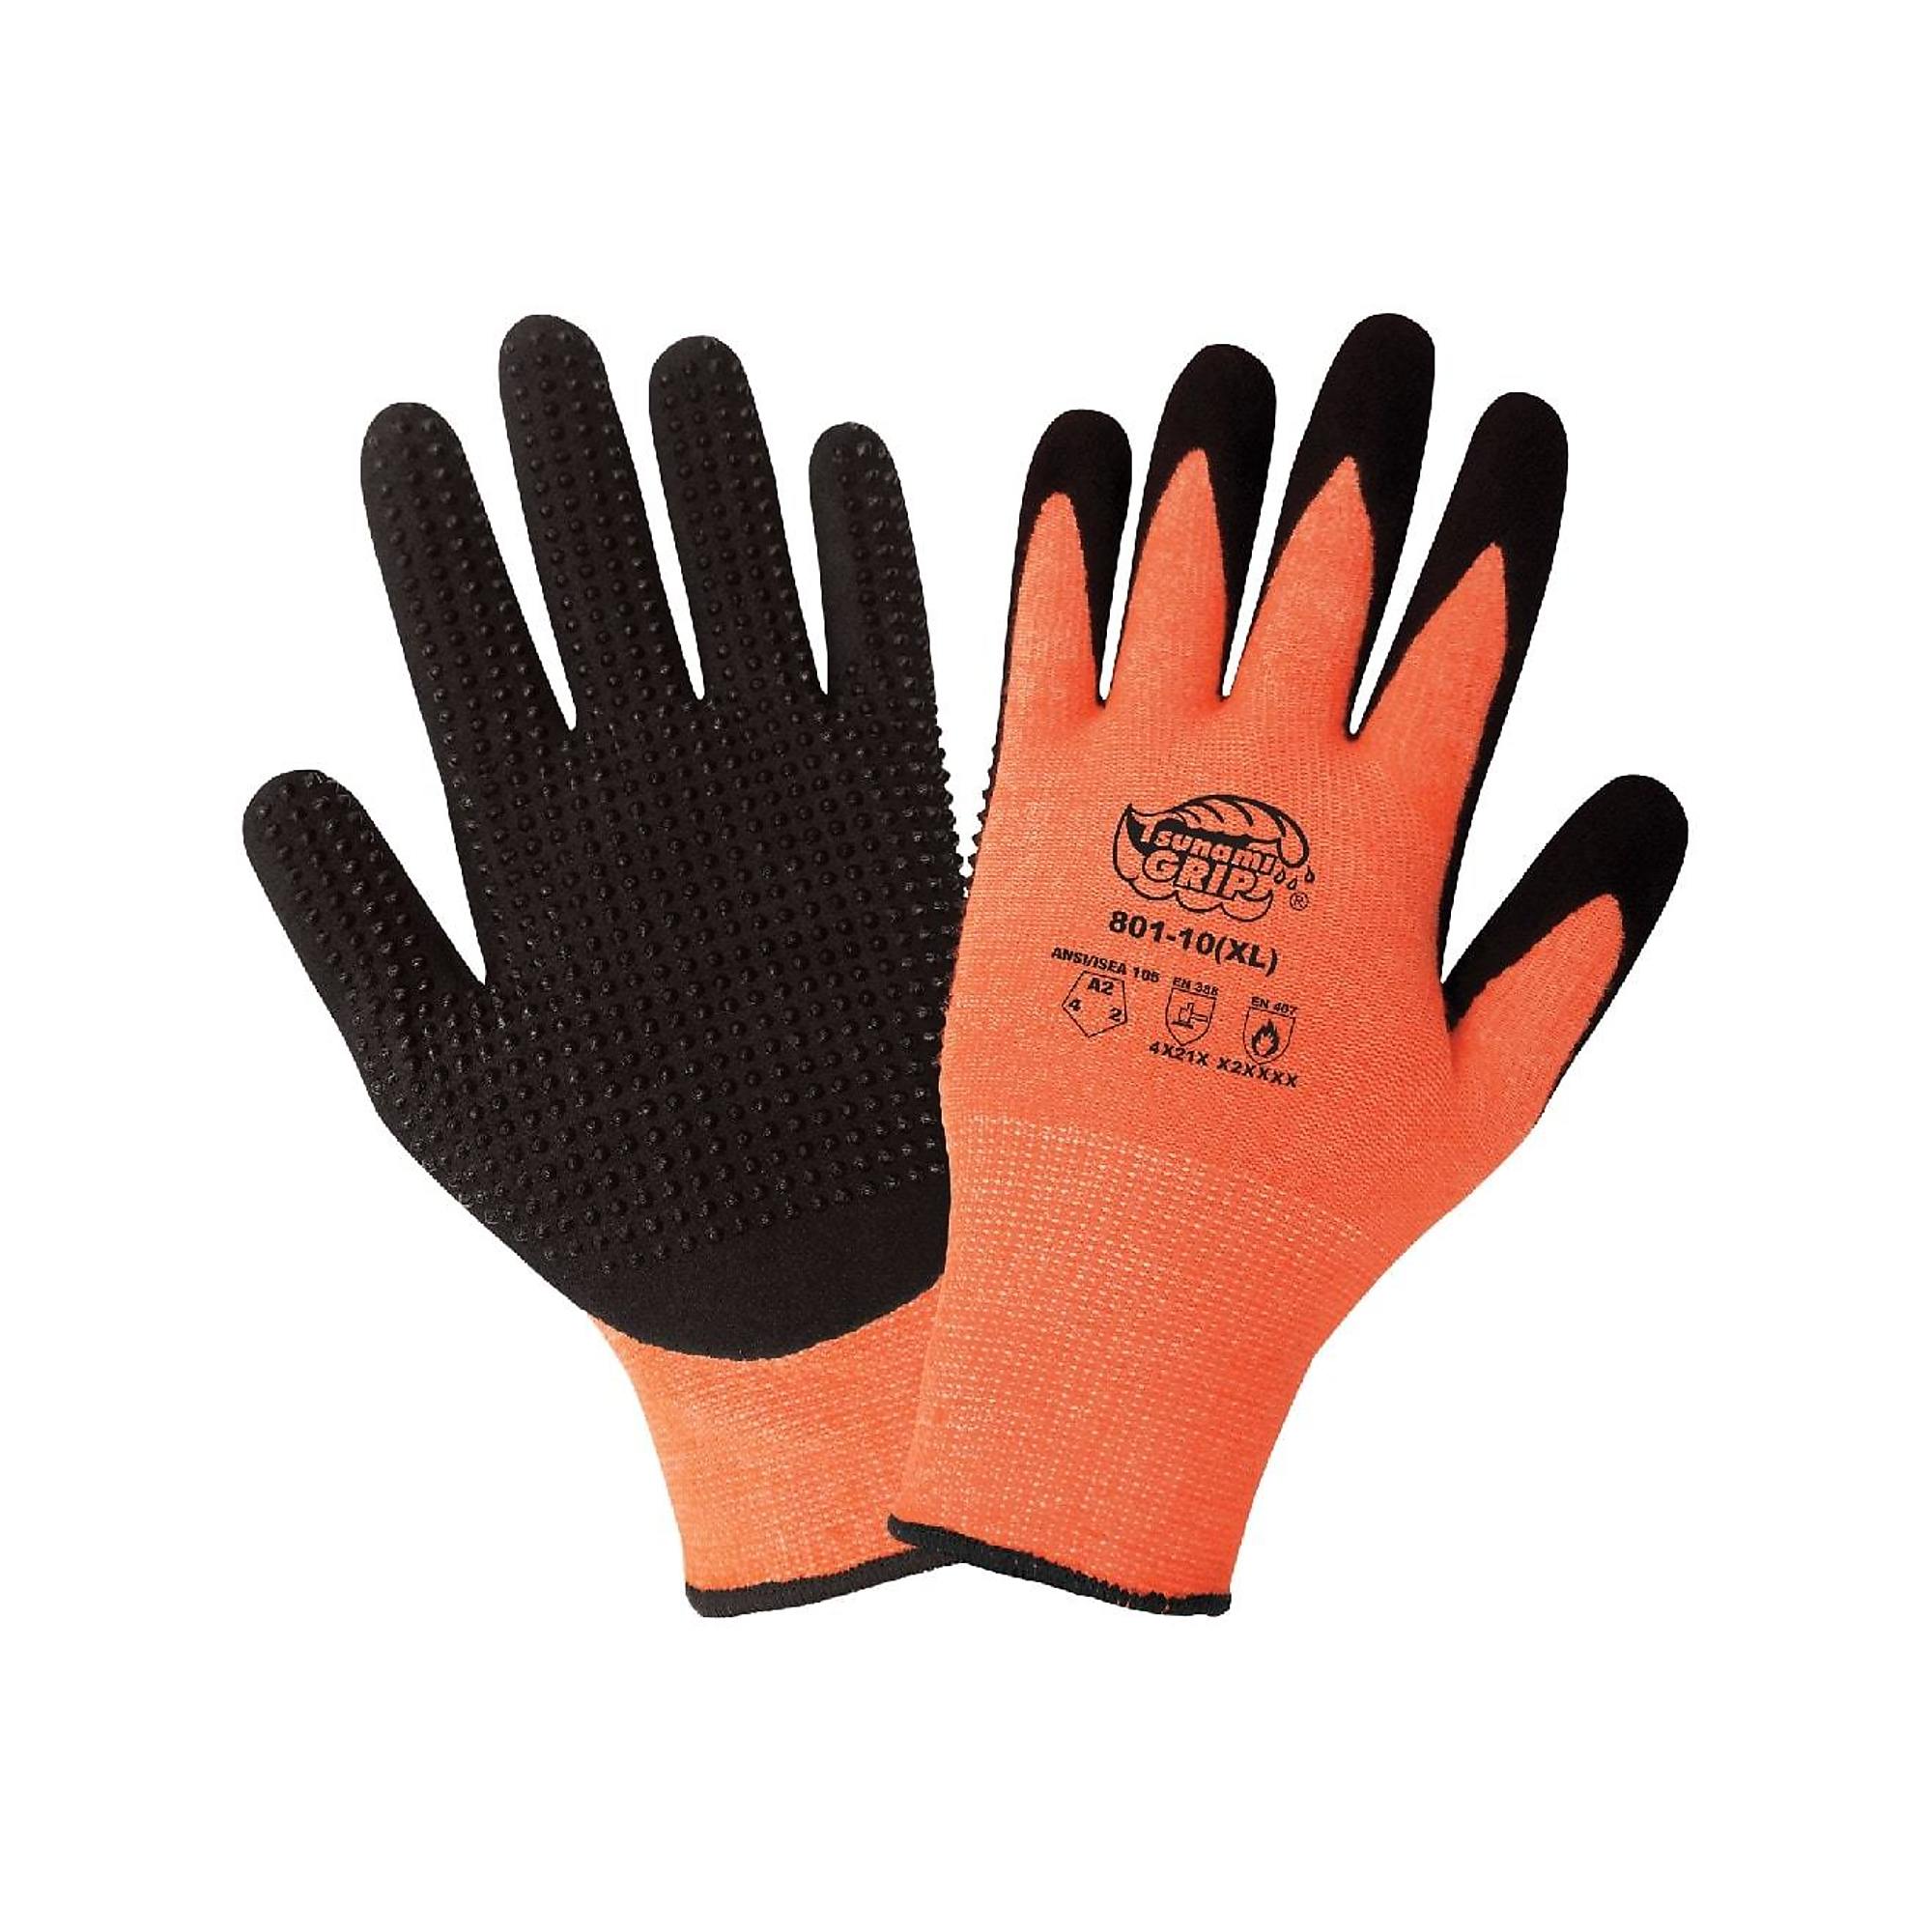 Global Glove Tsunami Grip , Orange, Heat Resist, Dotted, Cut Resist A2 Gloves - 12 Pairs, Size S, Color Orange/Black, Included (qty.) 12 Model 801-7(S